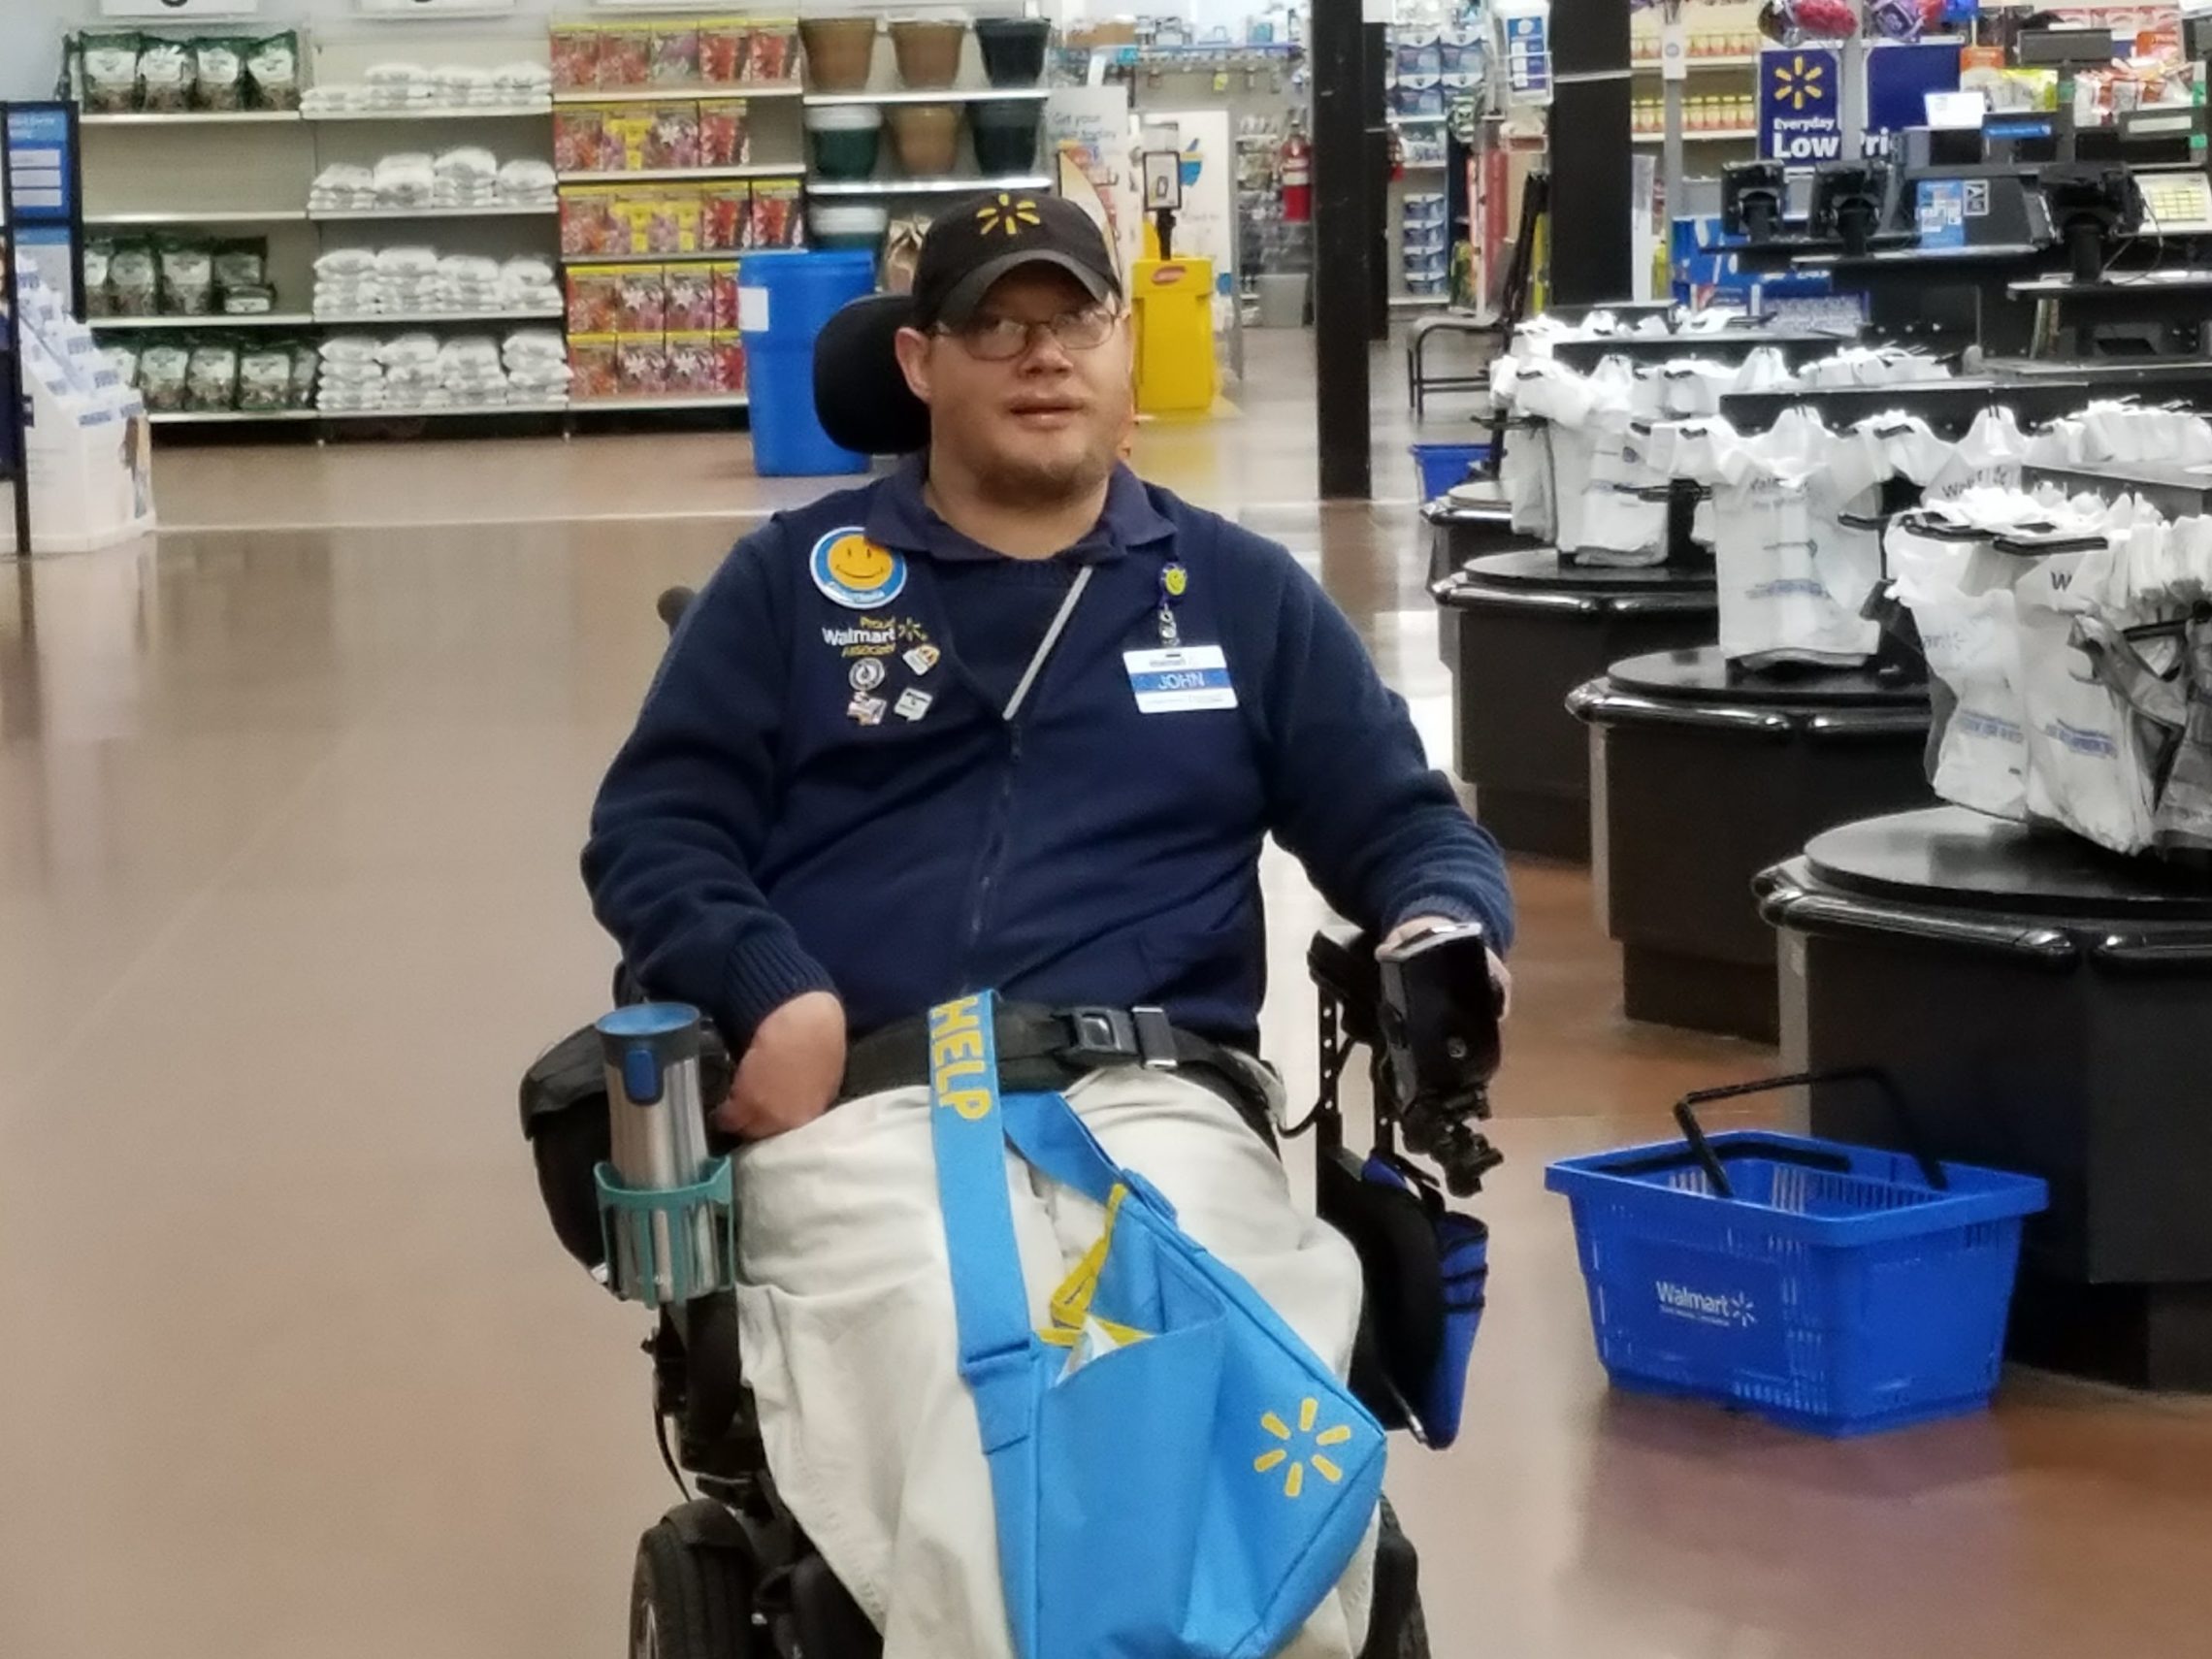 John Combs is a "people greeter" at a Walmart in Vancouver, Wash. But he has been told that come April 25, his job is going away. And he is not alone. Courtesy of Rachel Wasser